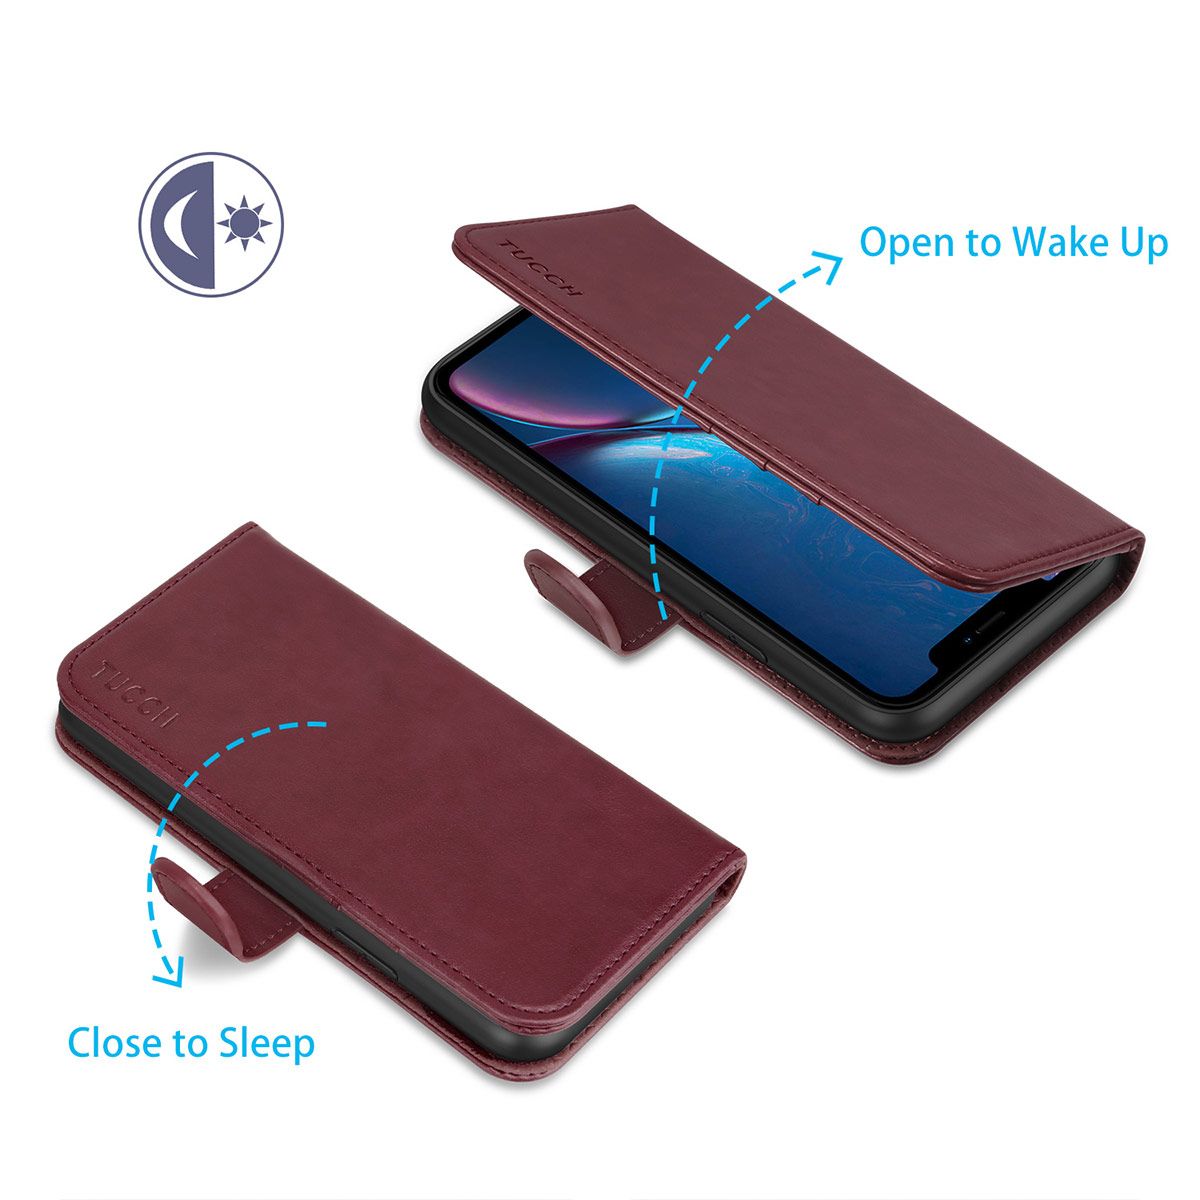 Tucch Iphone 11 Pro Max Wallet Case Iphone 11 Pro Max Leather Case Folio Flip Cover With Rfid Blocking Stand Credit Card Slots Magnetic Closure